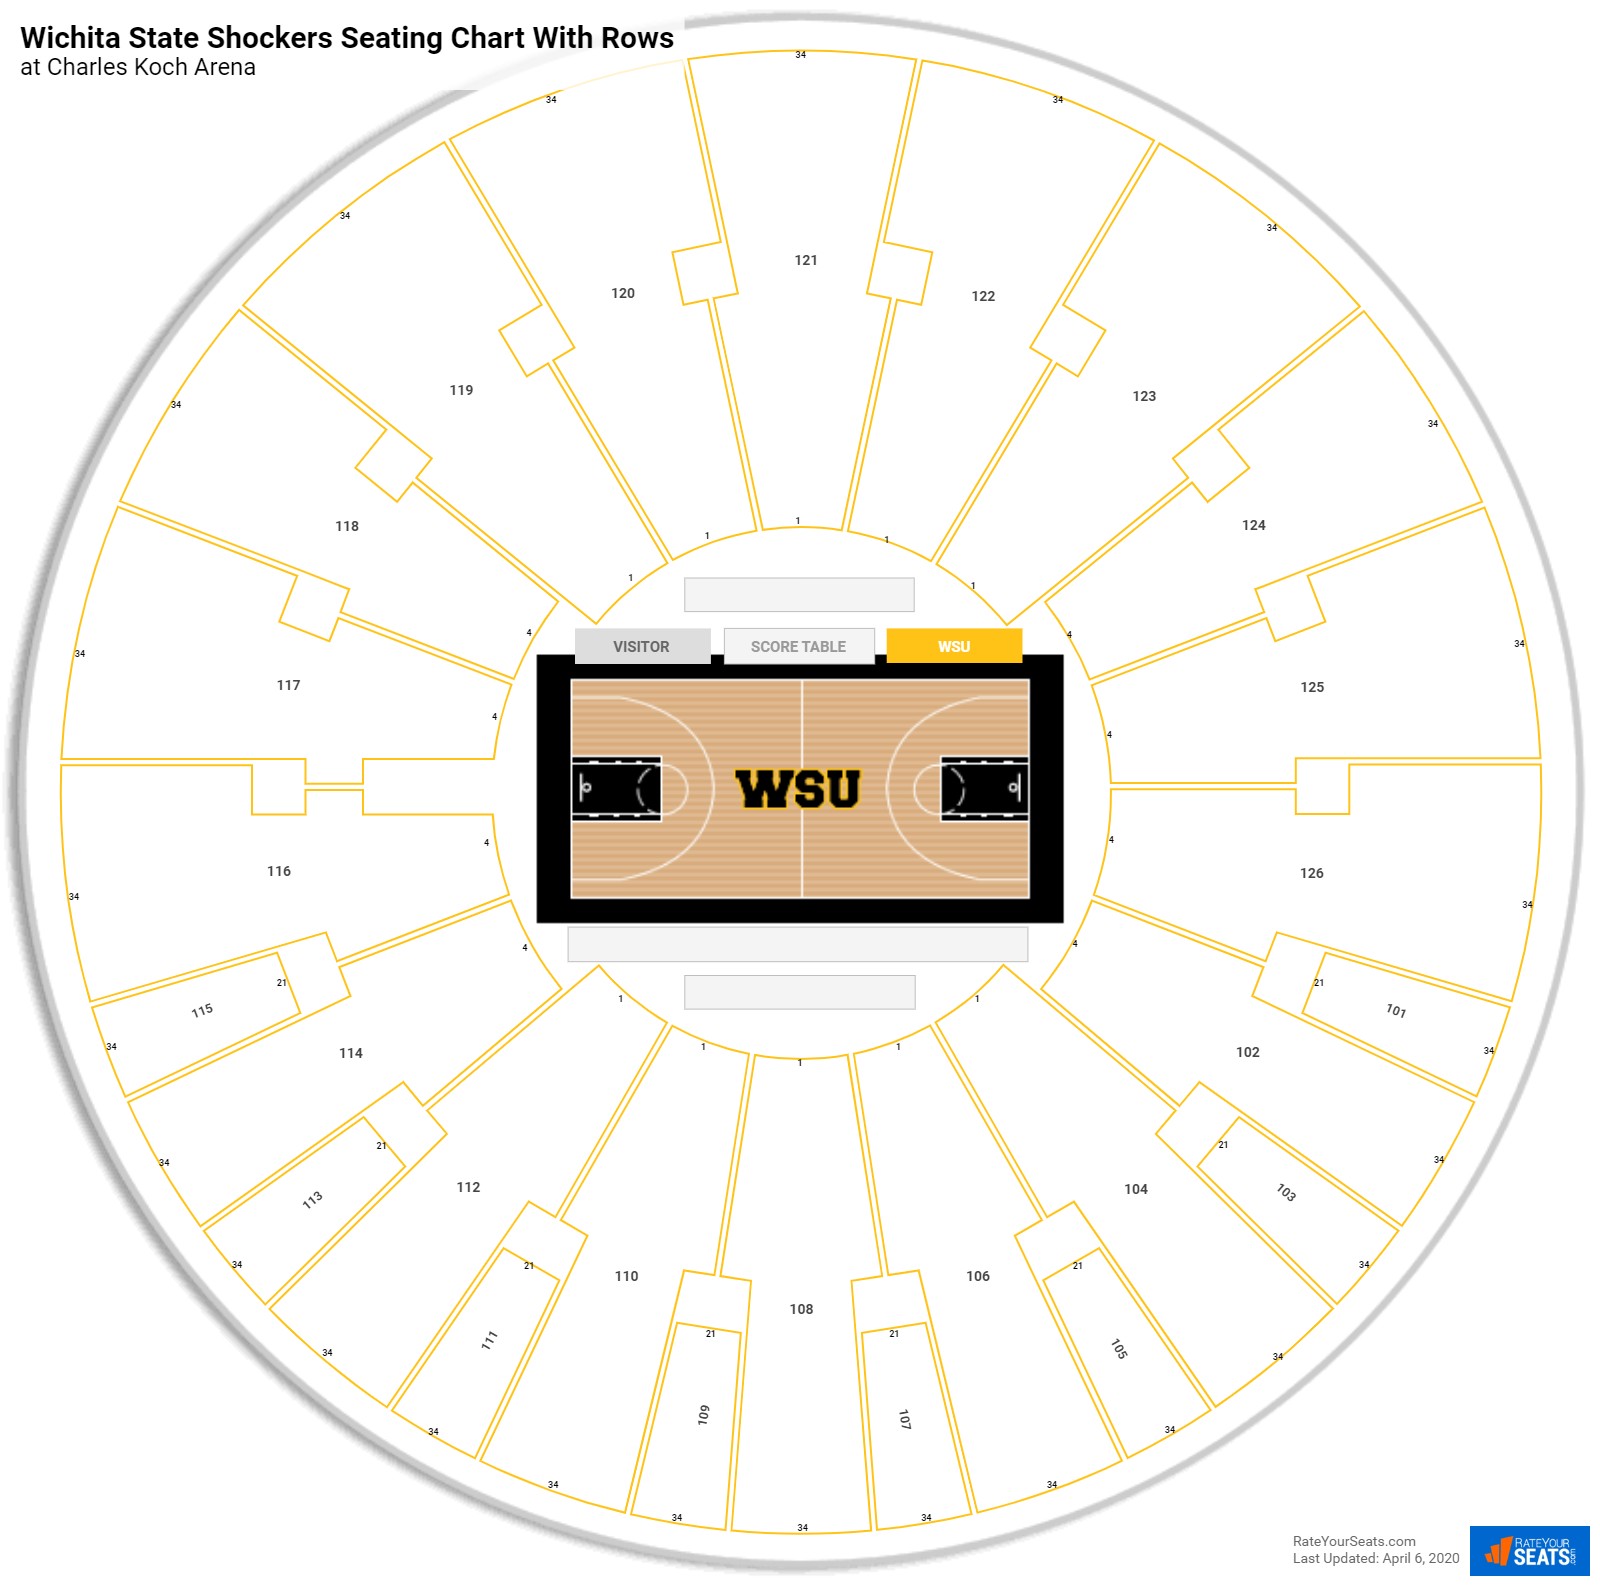 Charles Koch Arena seating chart with row numbers